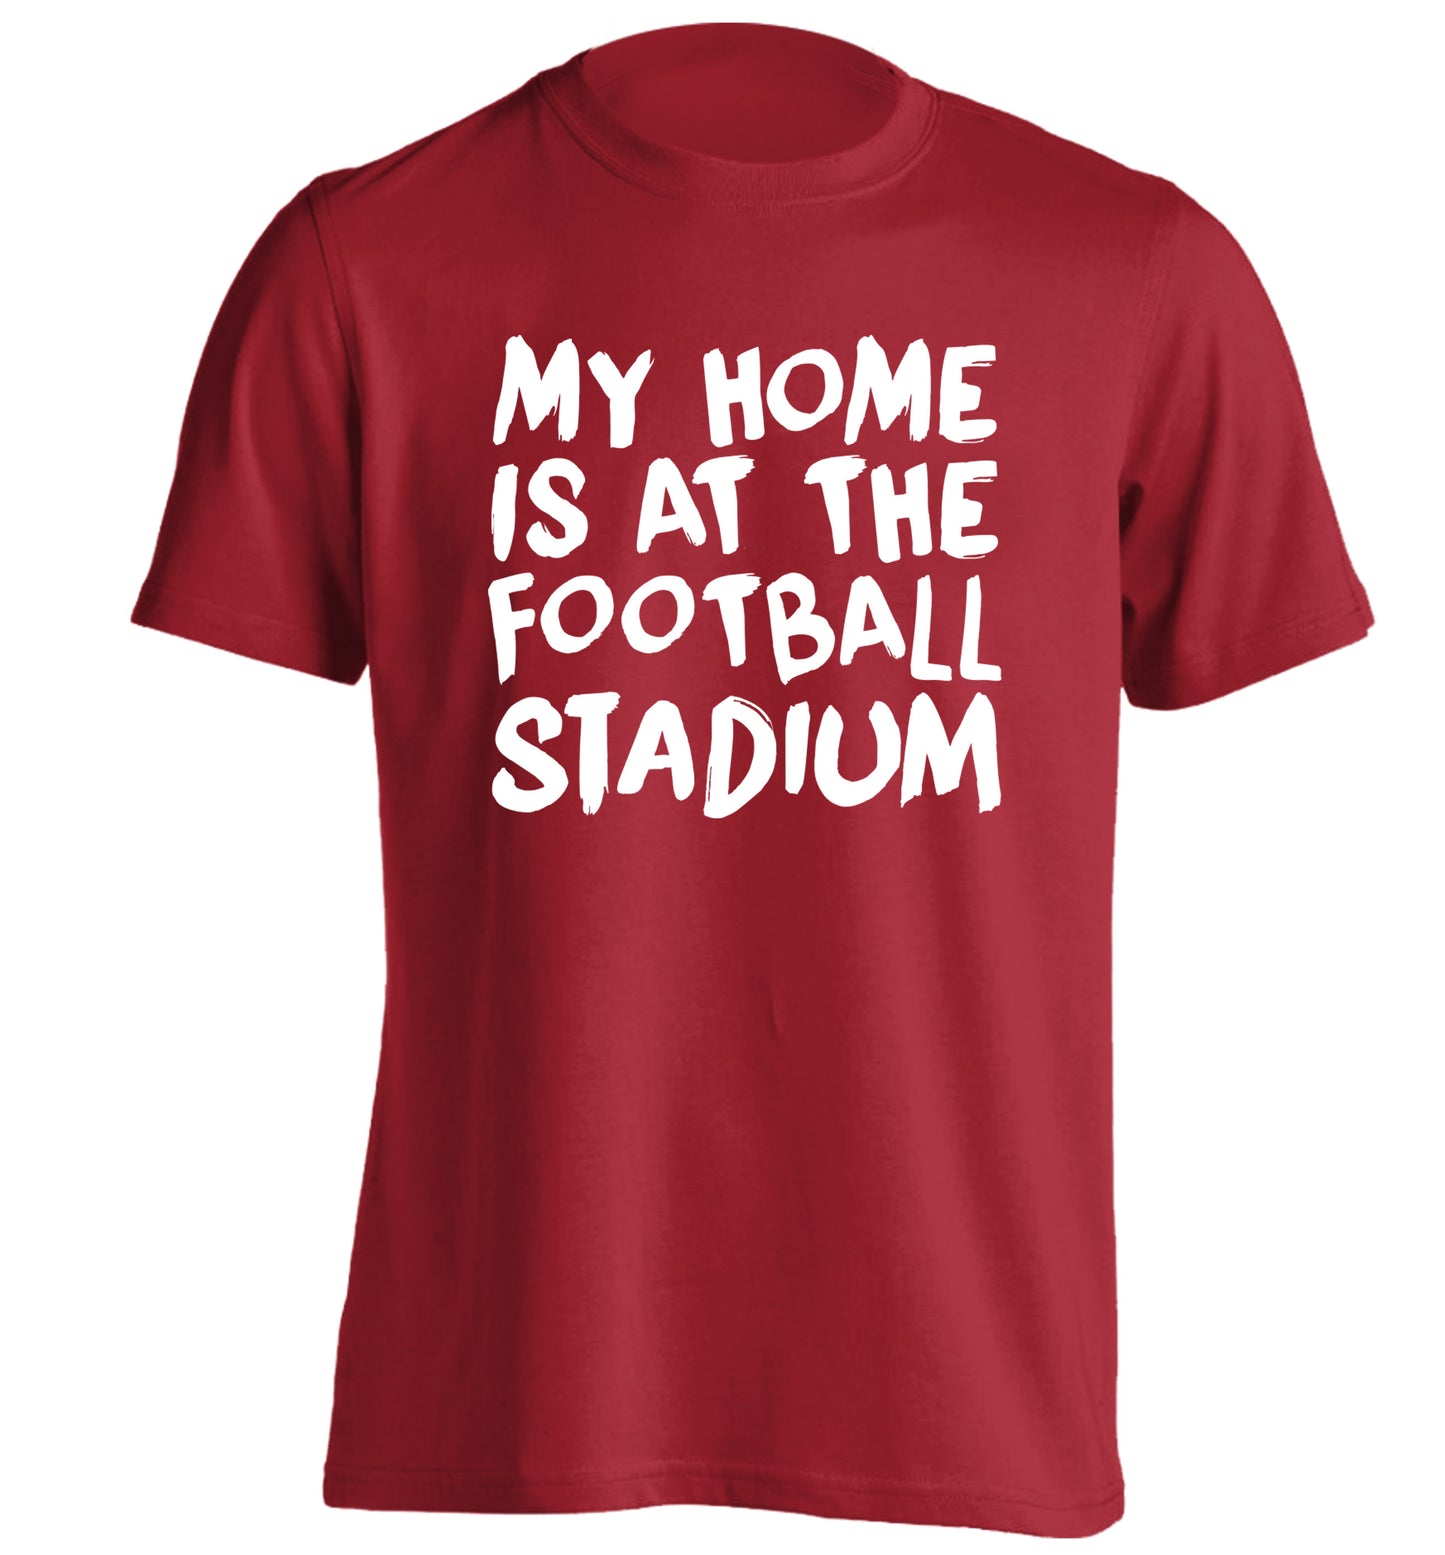 My home is at the football stadium adults unisex red Tshirt 2XL